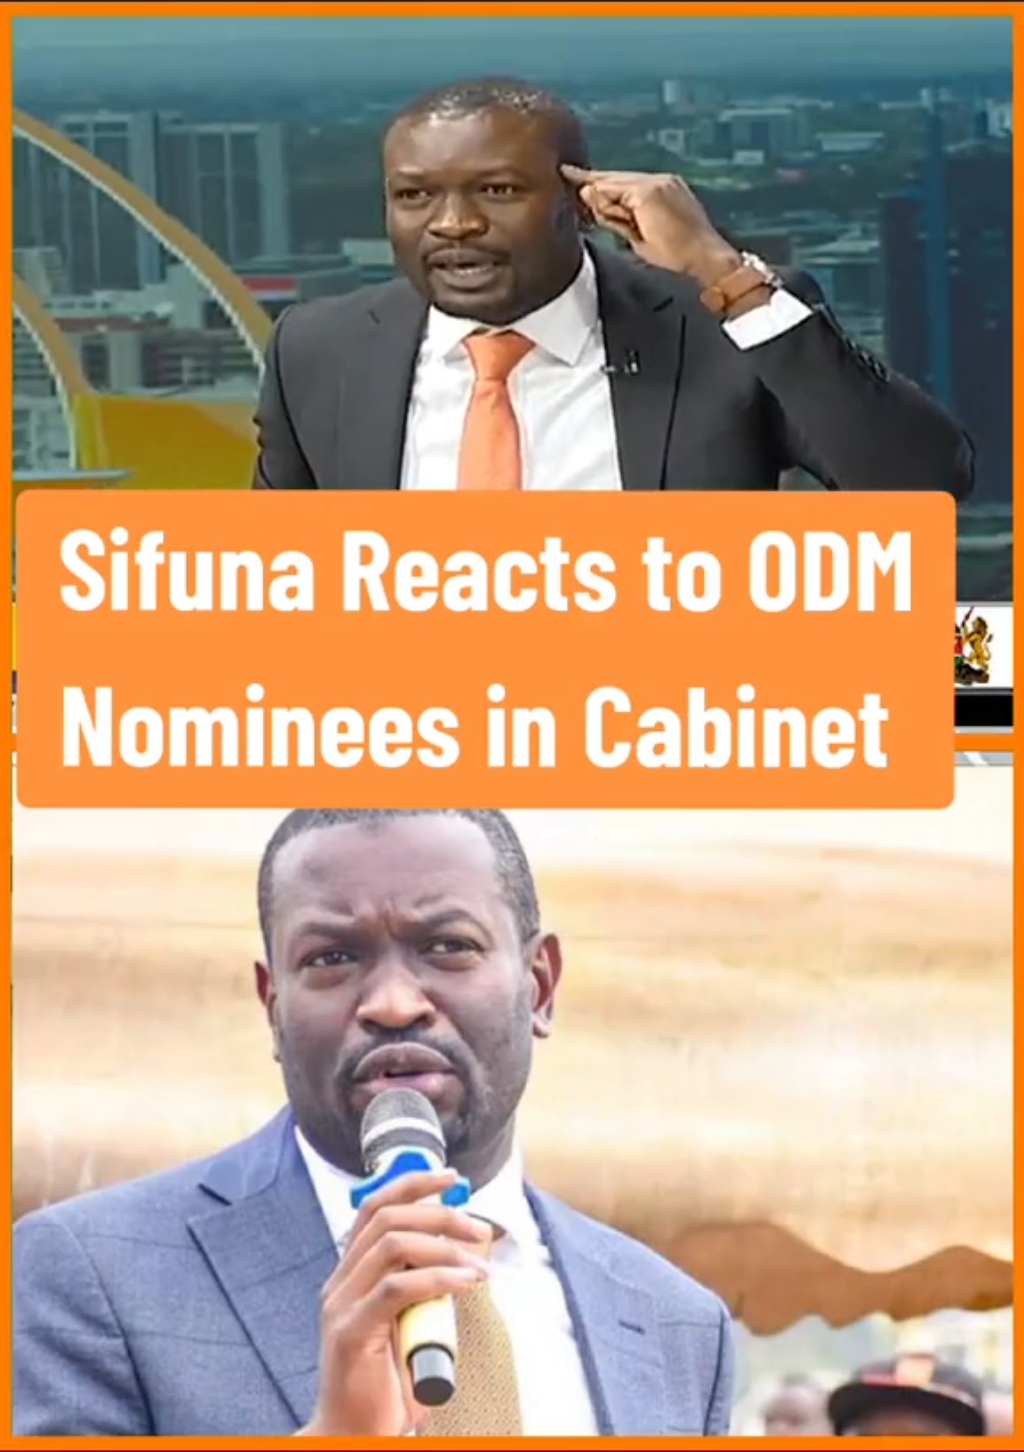 Sifuna Reacts to ODM Members Appointed in Cabinet ODM Secretary General Edwin Sifuna has responded to the appointment of several ODM members to President Ruto's cabinet with a mix of praise and caution. Sifuna expressed pride in seeing ODM members being recognized for their capabilities and included in key government positions. He acknowledged this as a step towards fostering national unity and collaboration across political lines. #jupiternews #kenyannews #kenyapolitics 